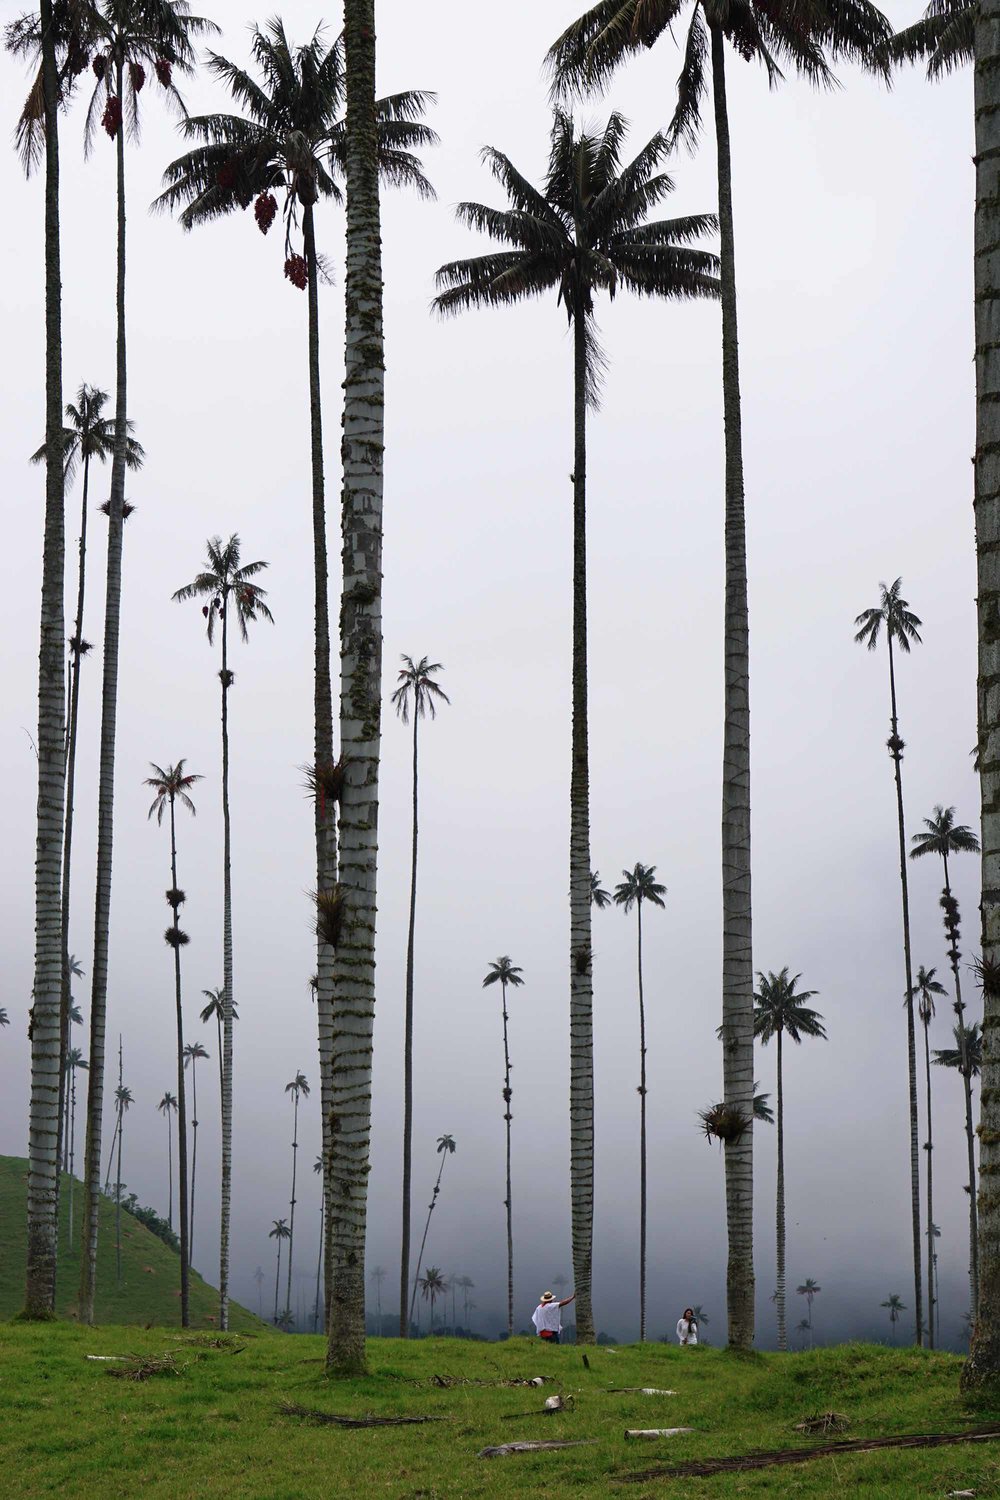 Wax Palms | World's tallest palm tree in Valle de Cocora, Salento, Colombia